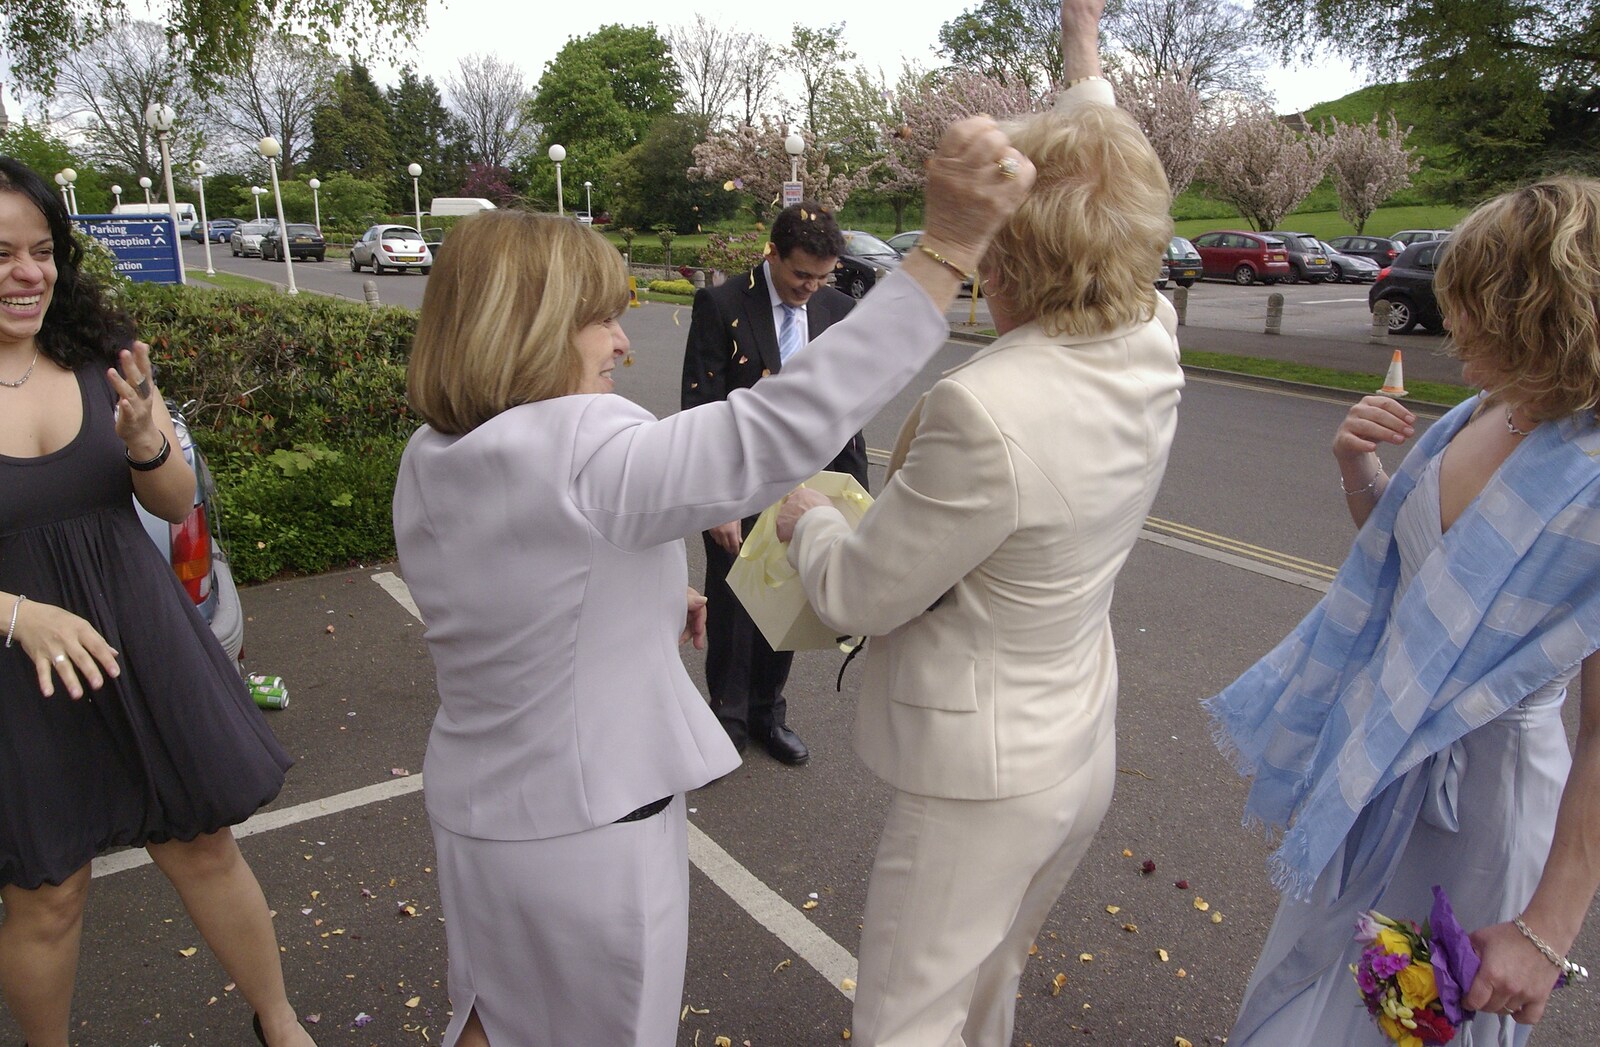 Hani and Anne's Wedding, County Hall, Cambridge - 2nd May 2008: More confetti